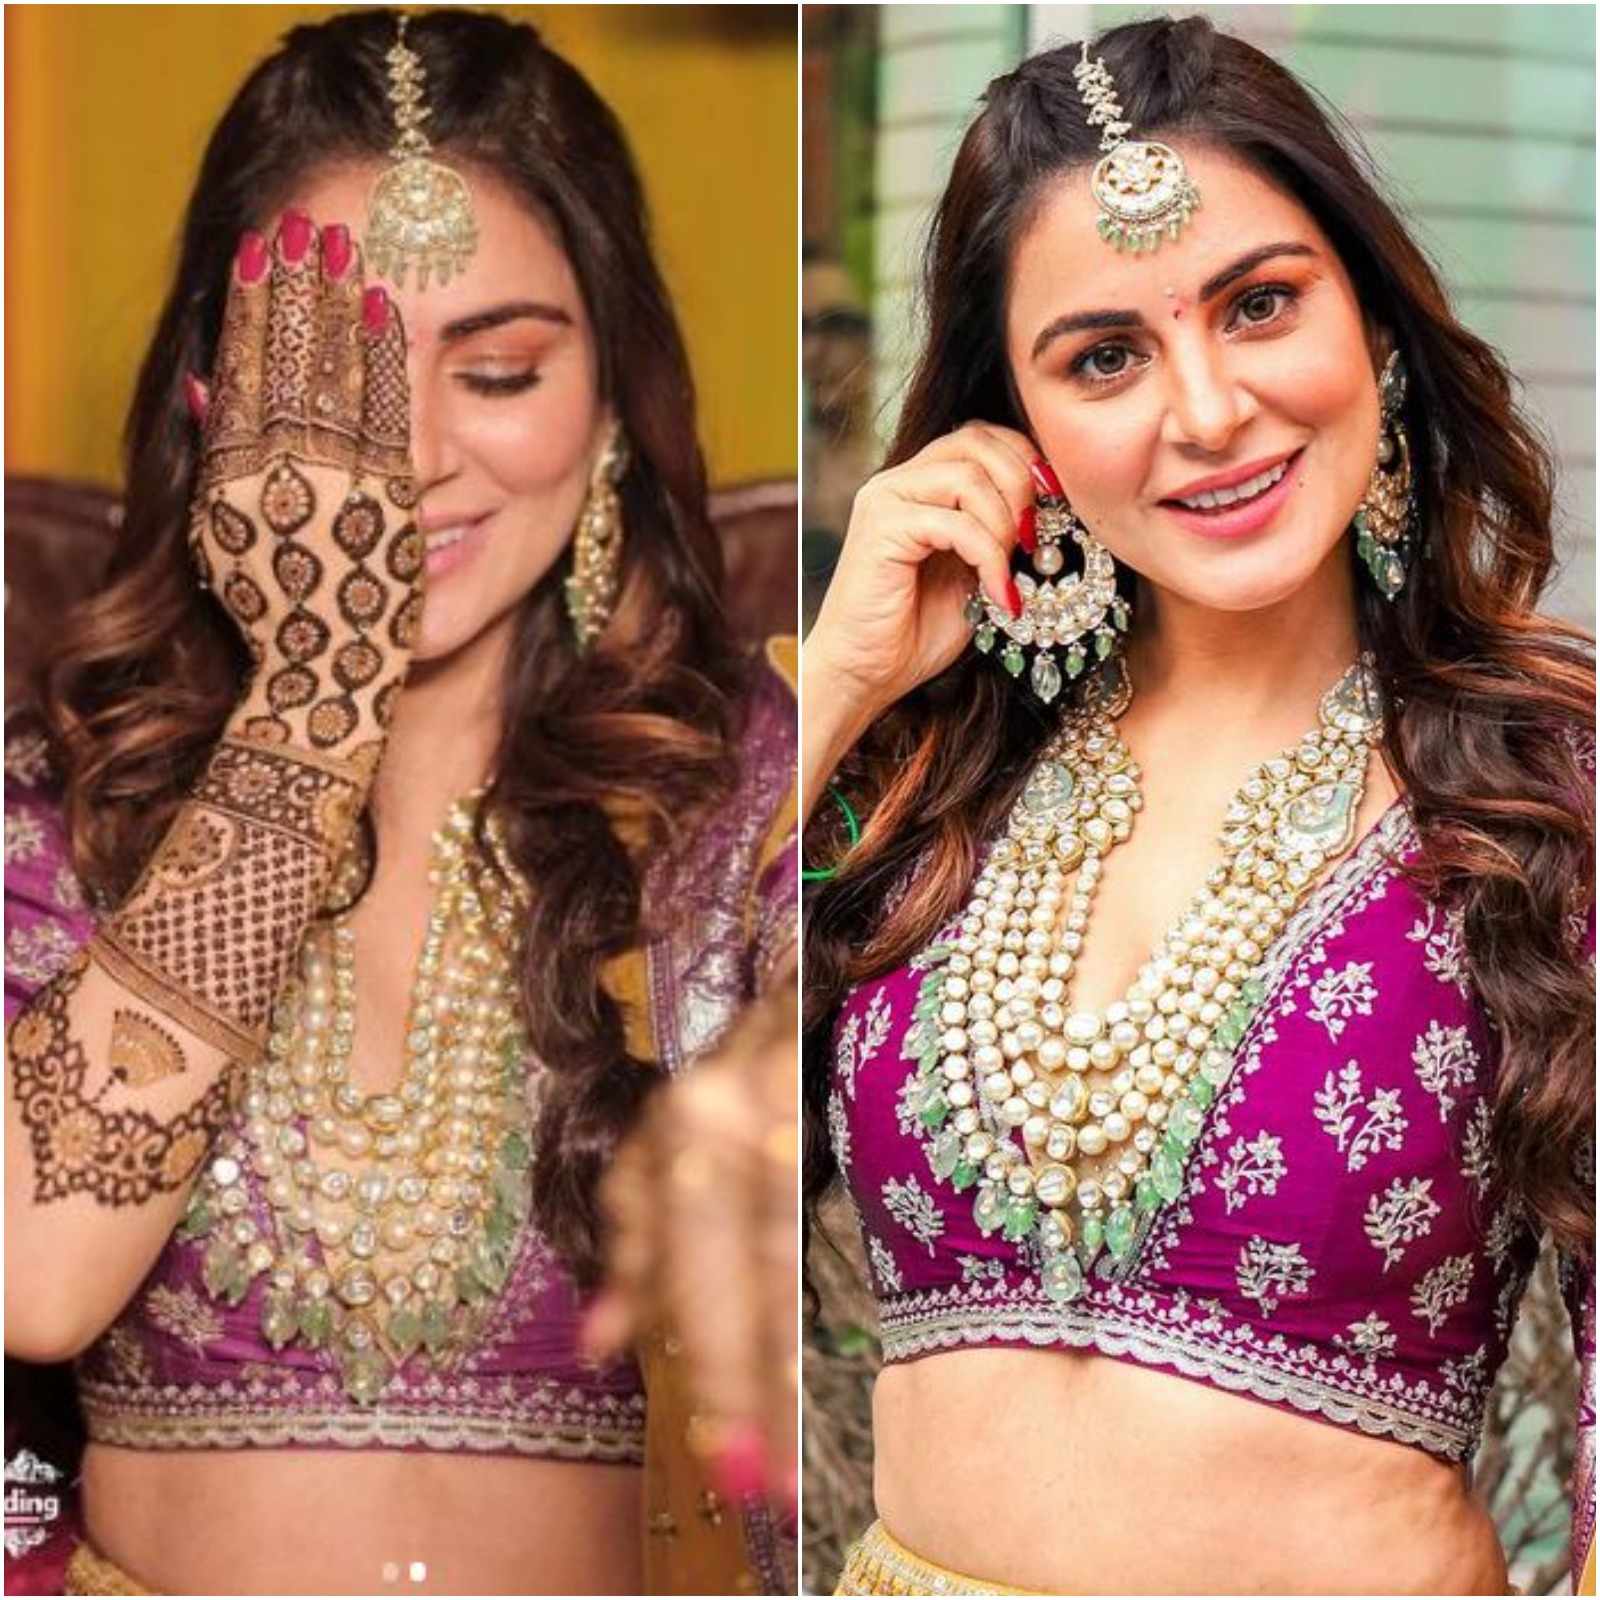 IWMBuzz - Whose hairstyle is your favorite? A. Shraddha arya B. Rubina  Dilaik Today is the last day to vote and make your favorite actress win in  the Most Stylish Hair (Reel)